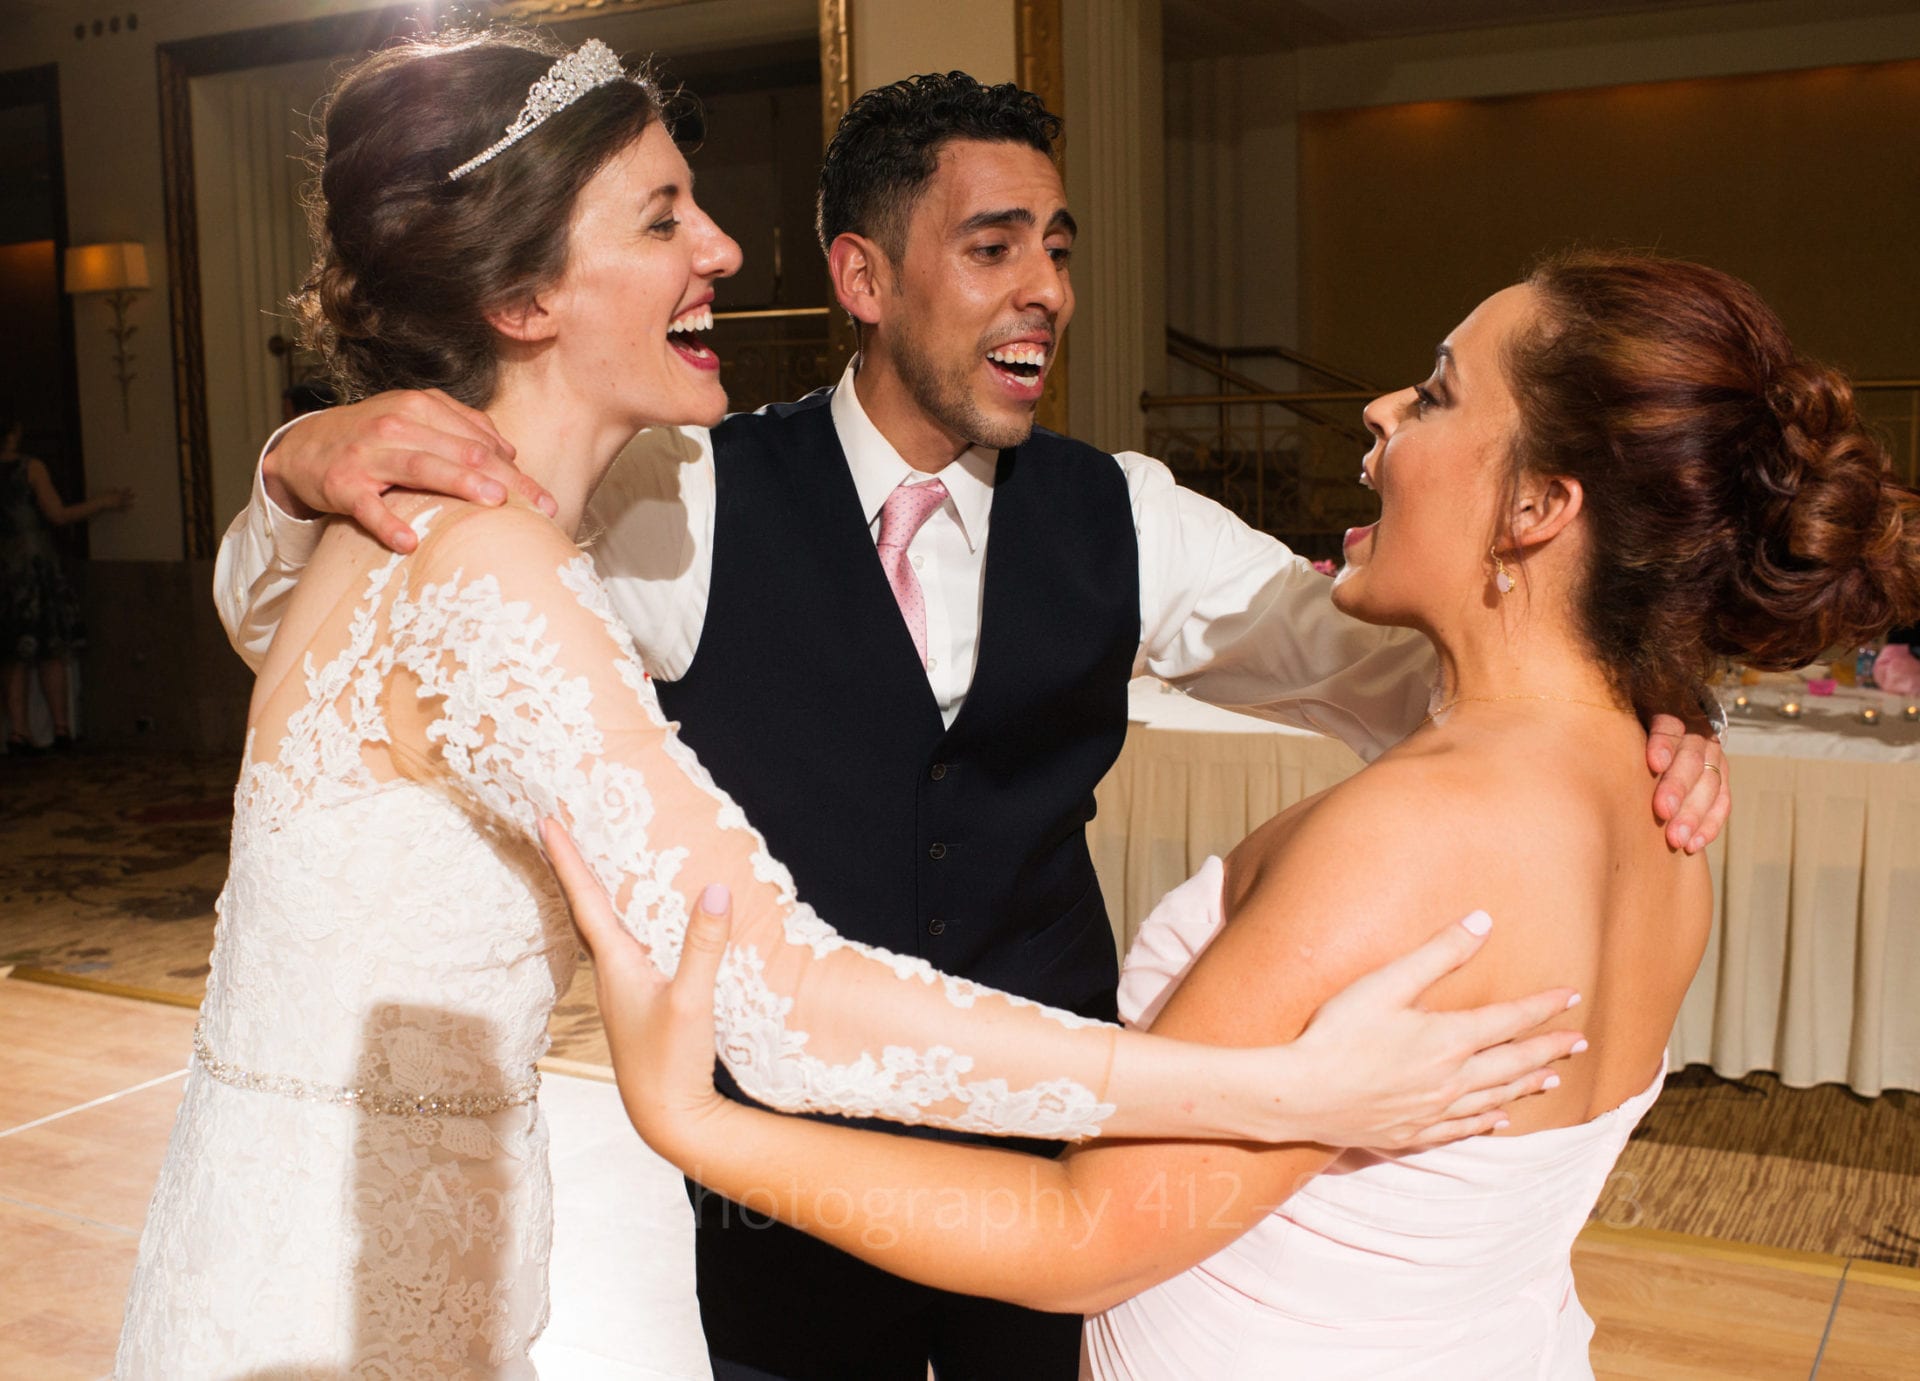 Bride and groom link arms as they dance with the groom's sister during the reception of their William Penn Hotel Wedding.